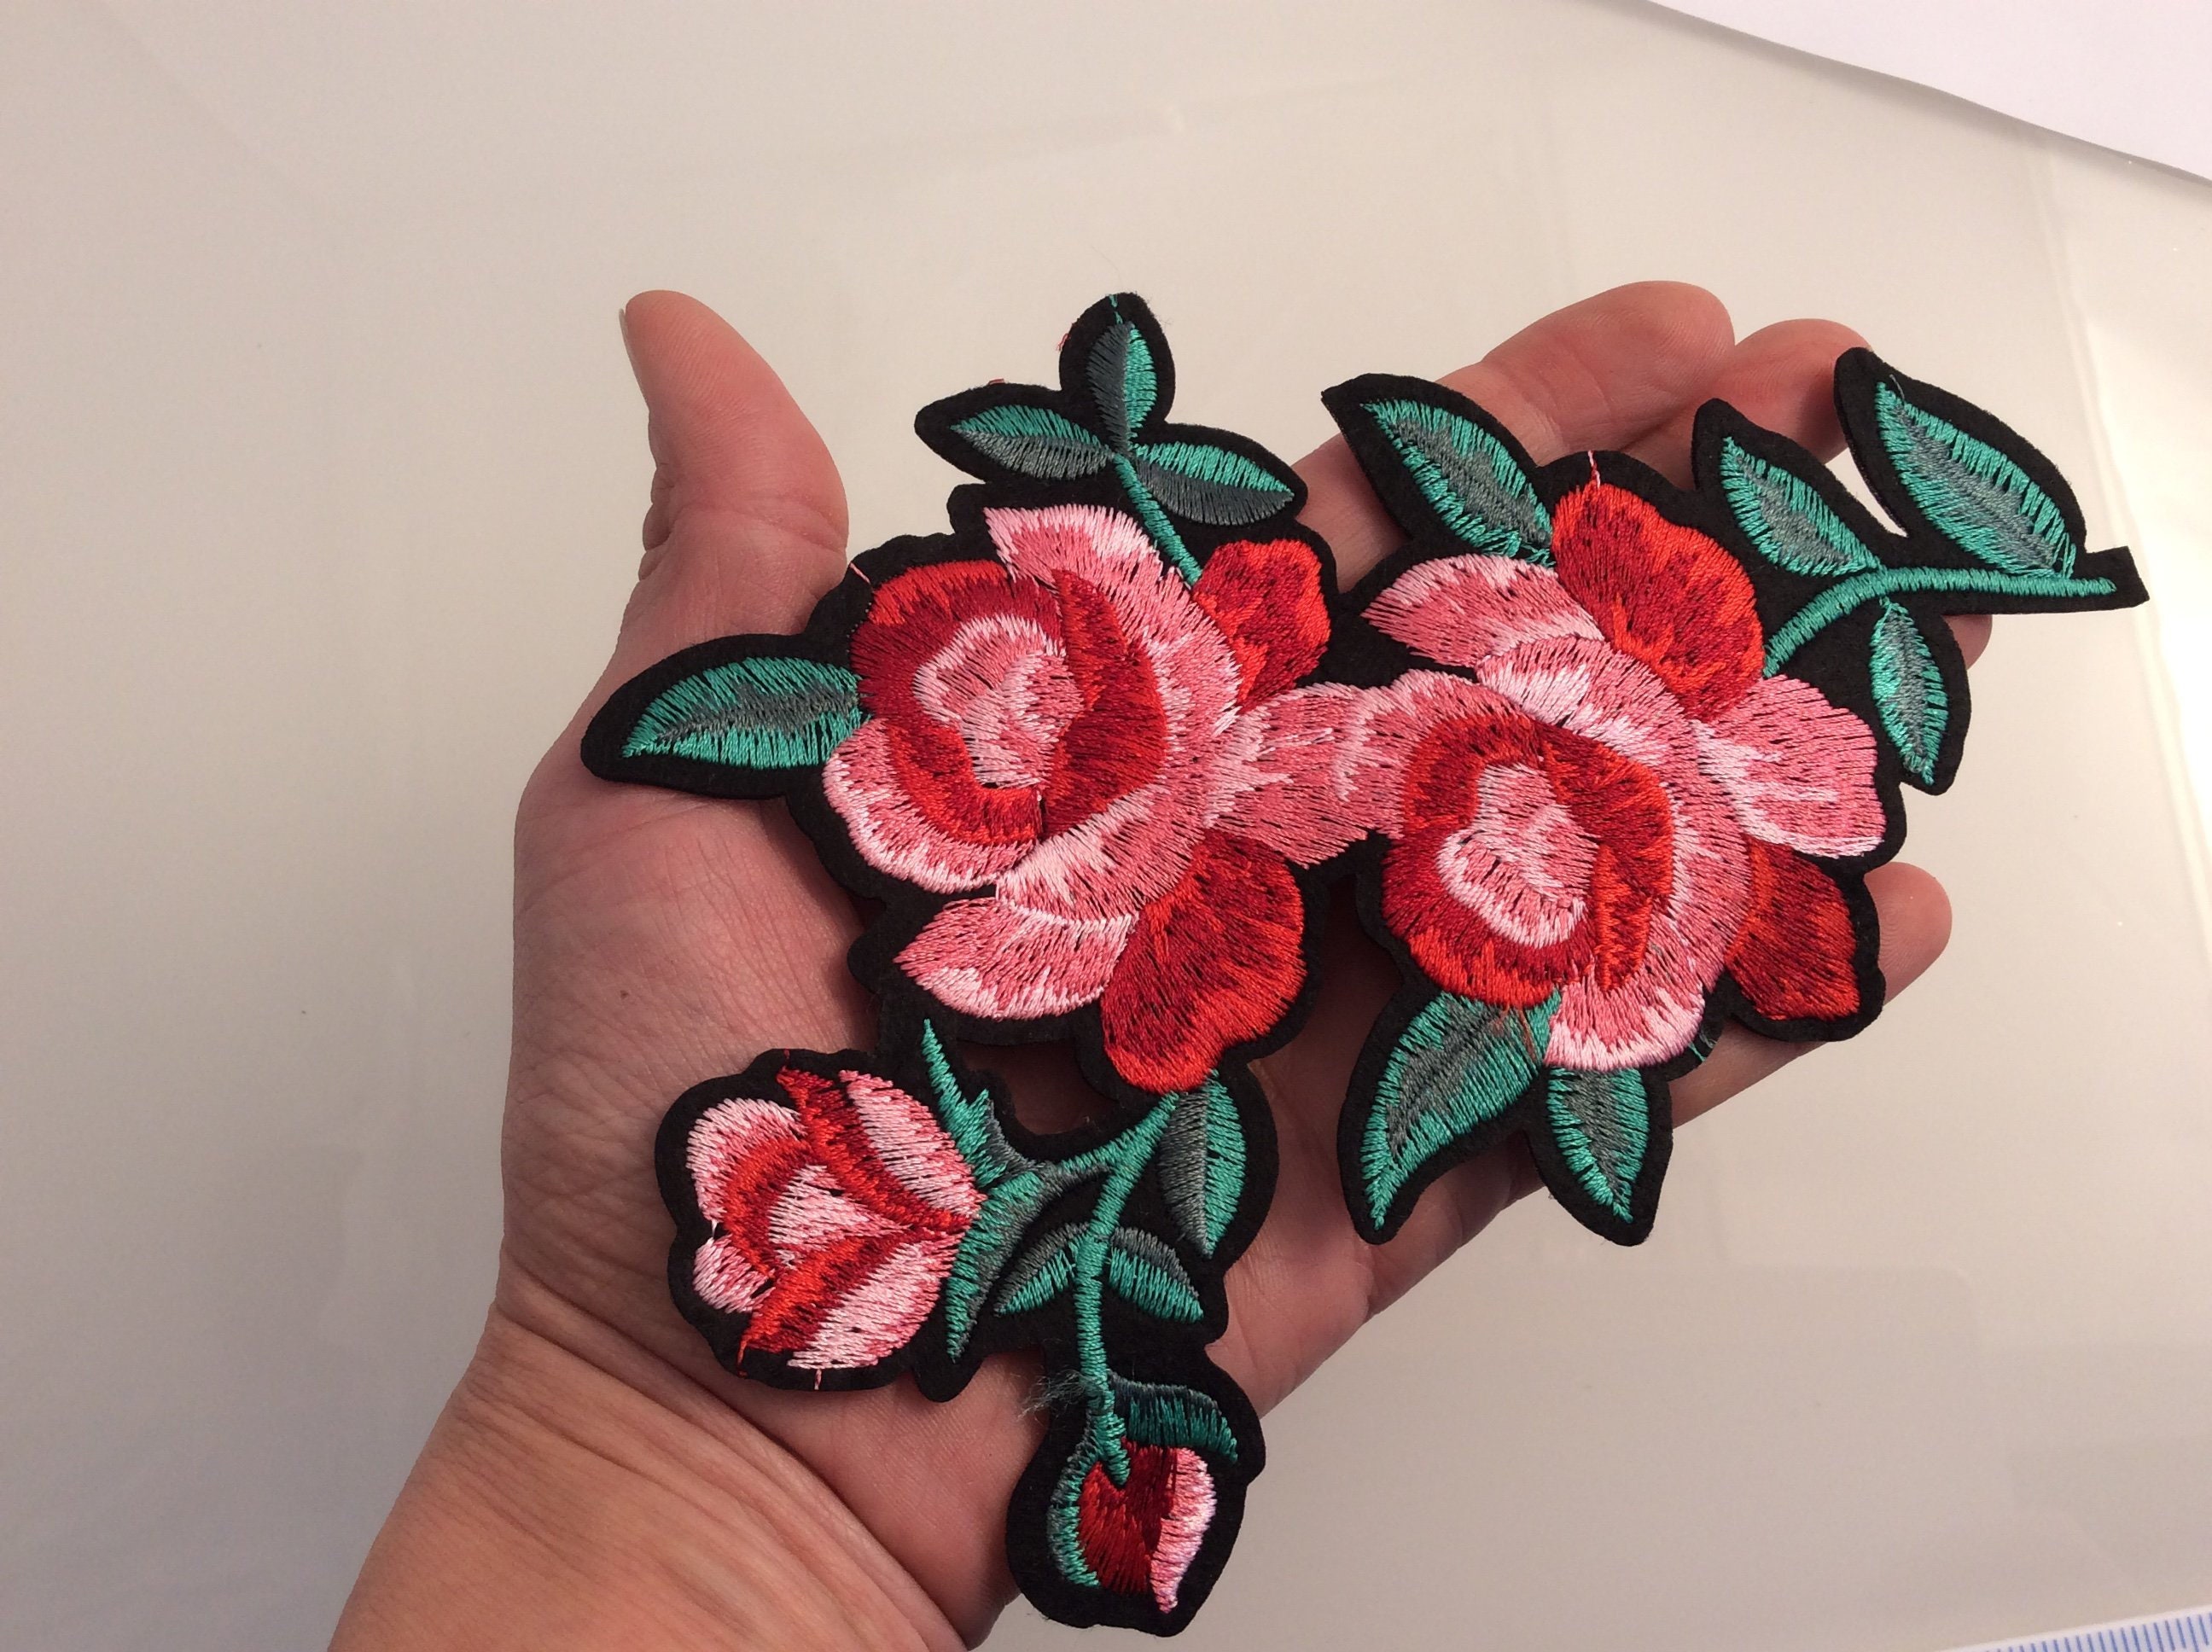 New Embroidered Applique Patch design DIY Sew On ironed on  lovely roses